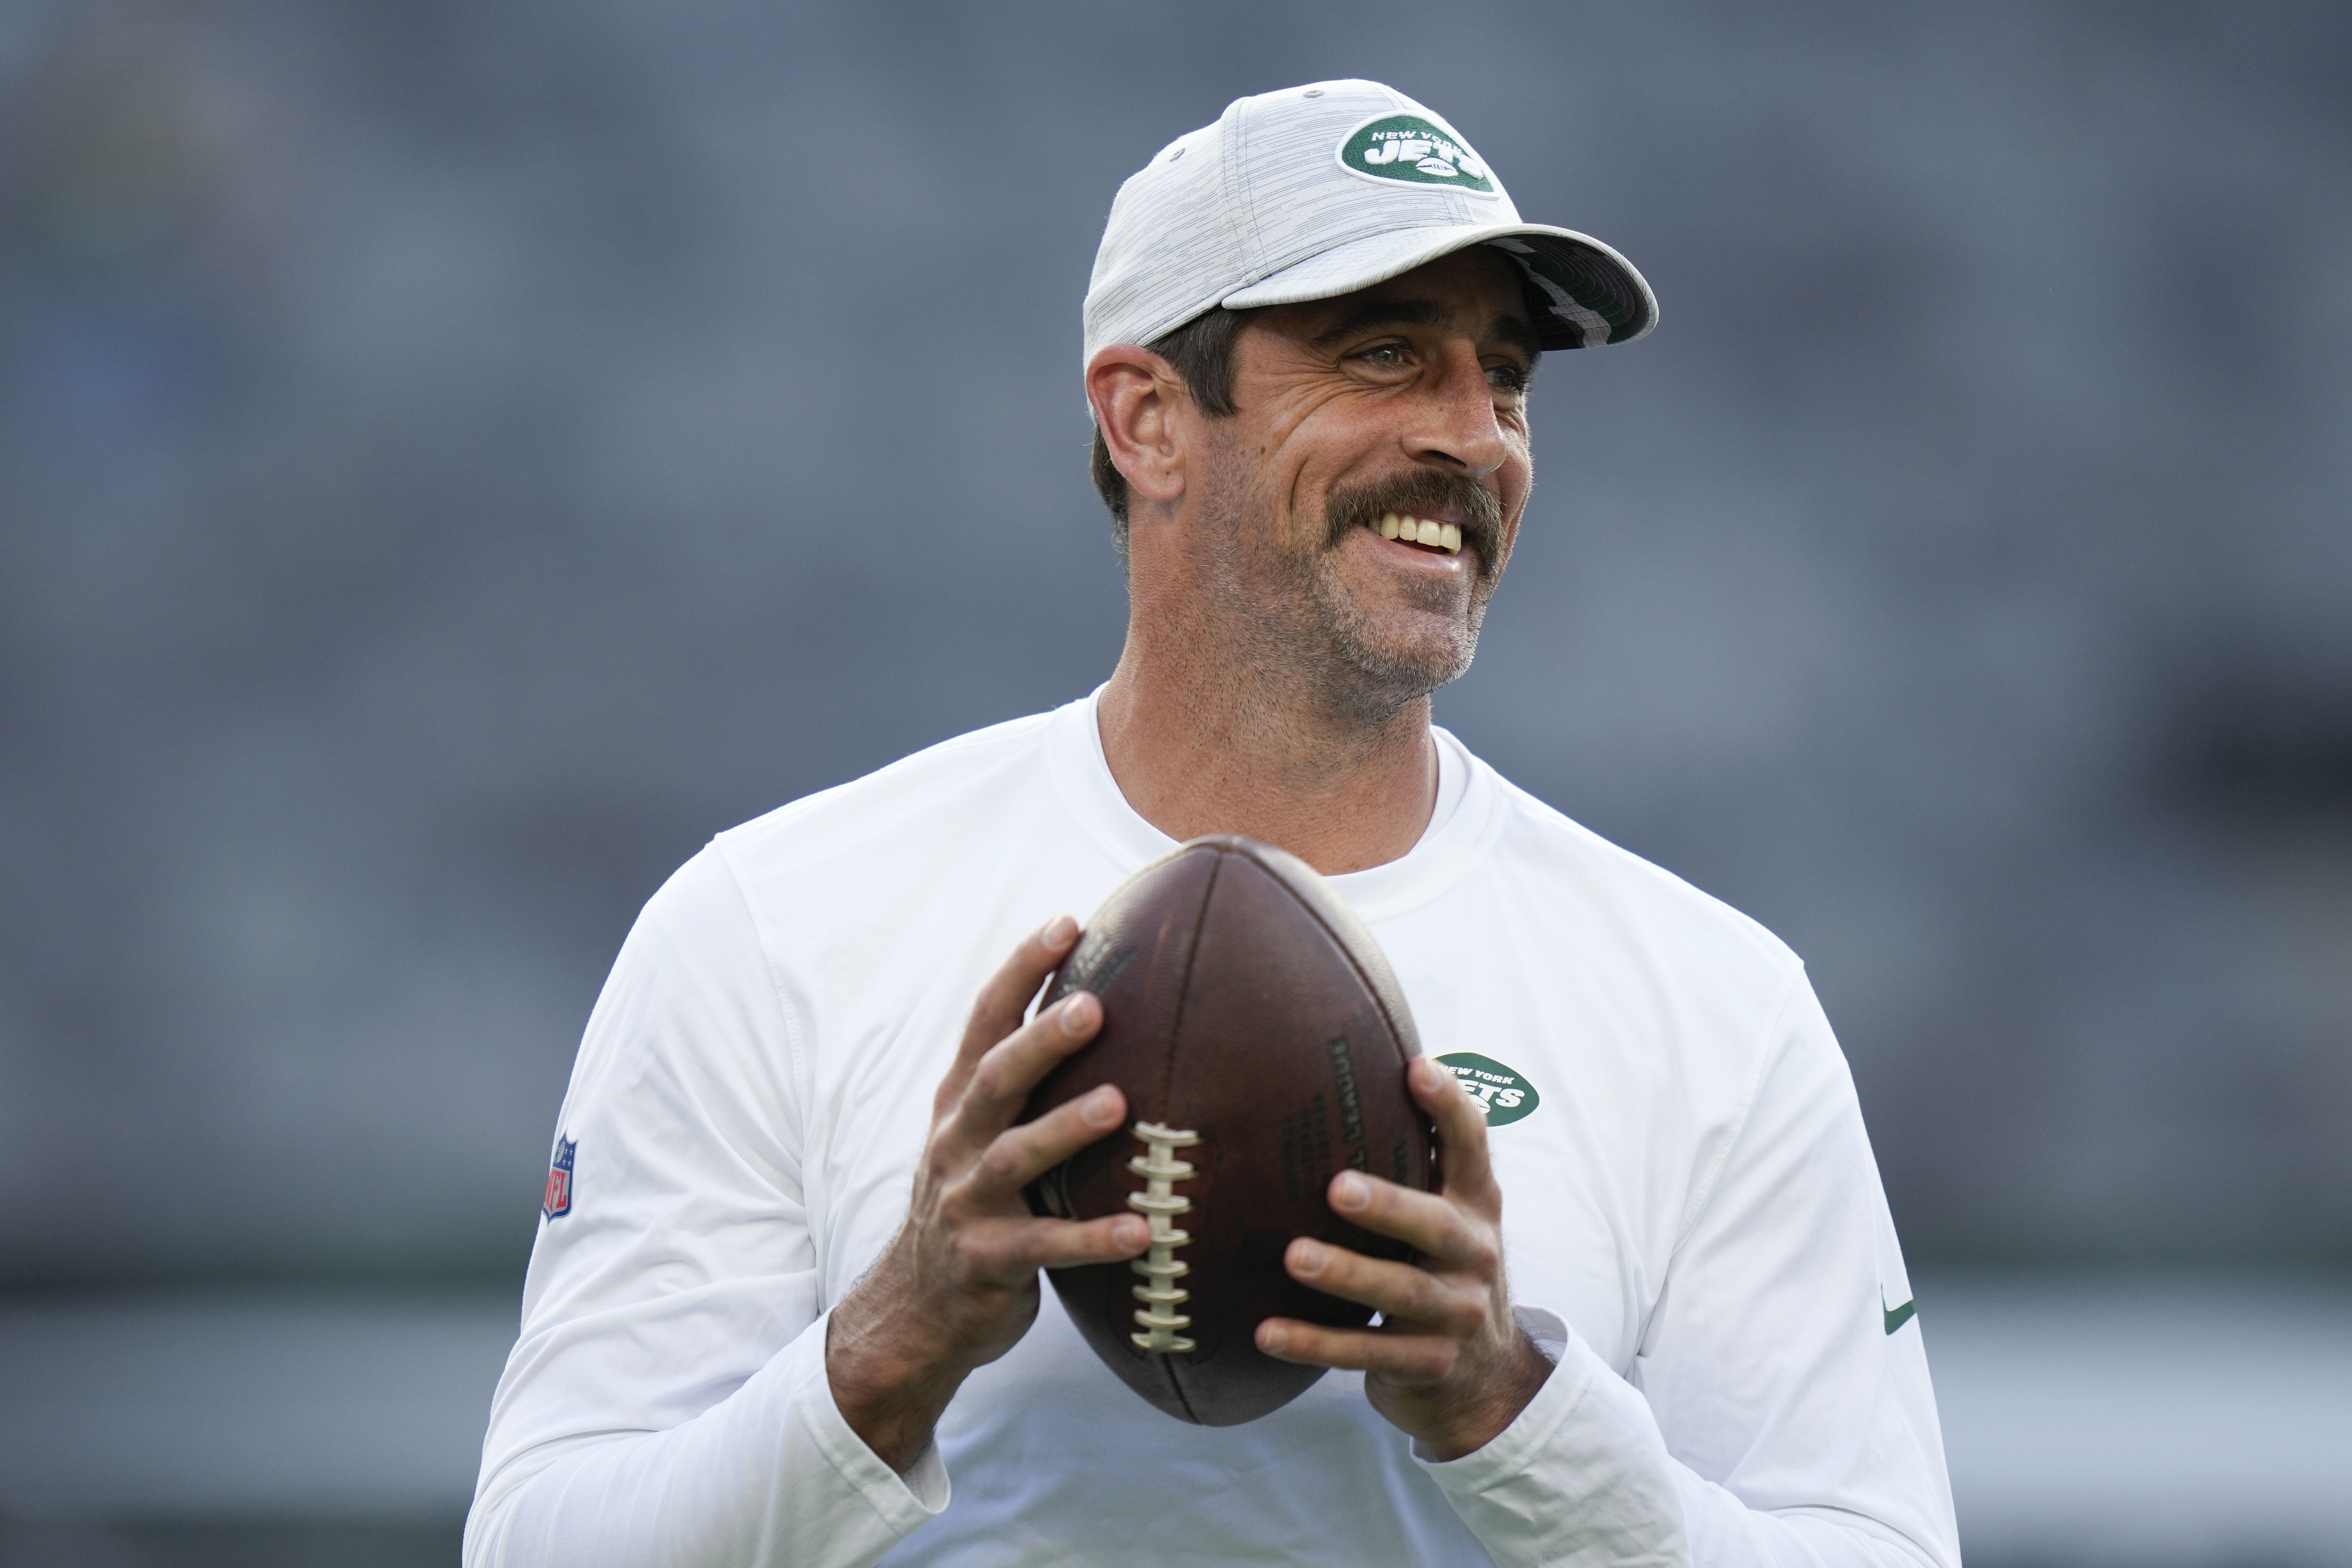 Jets-Giants betting preview for Aaron Rodgers’ New York debut